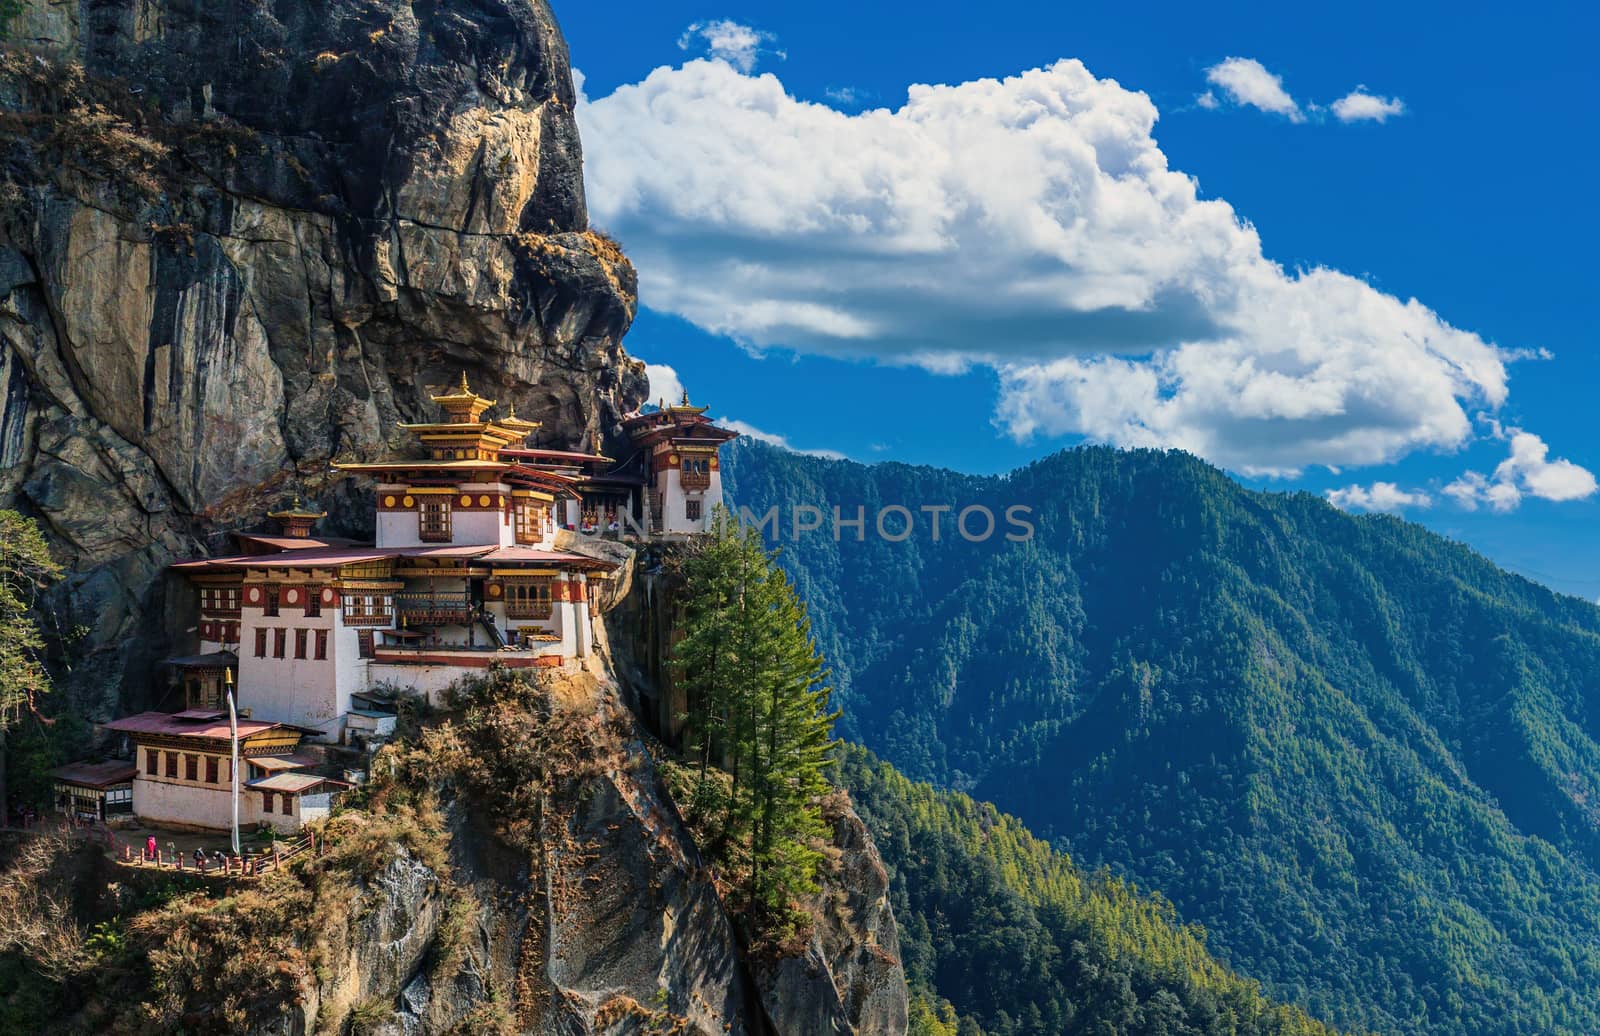 Tiger's Nest Monastery or Taktsang Lhakhang in Paro, Bhutan by COffe